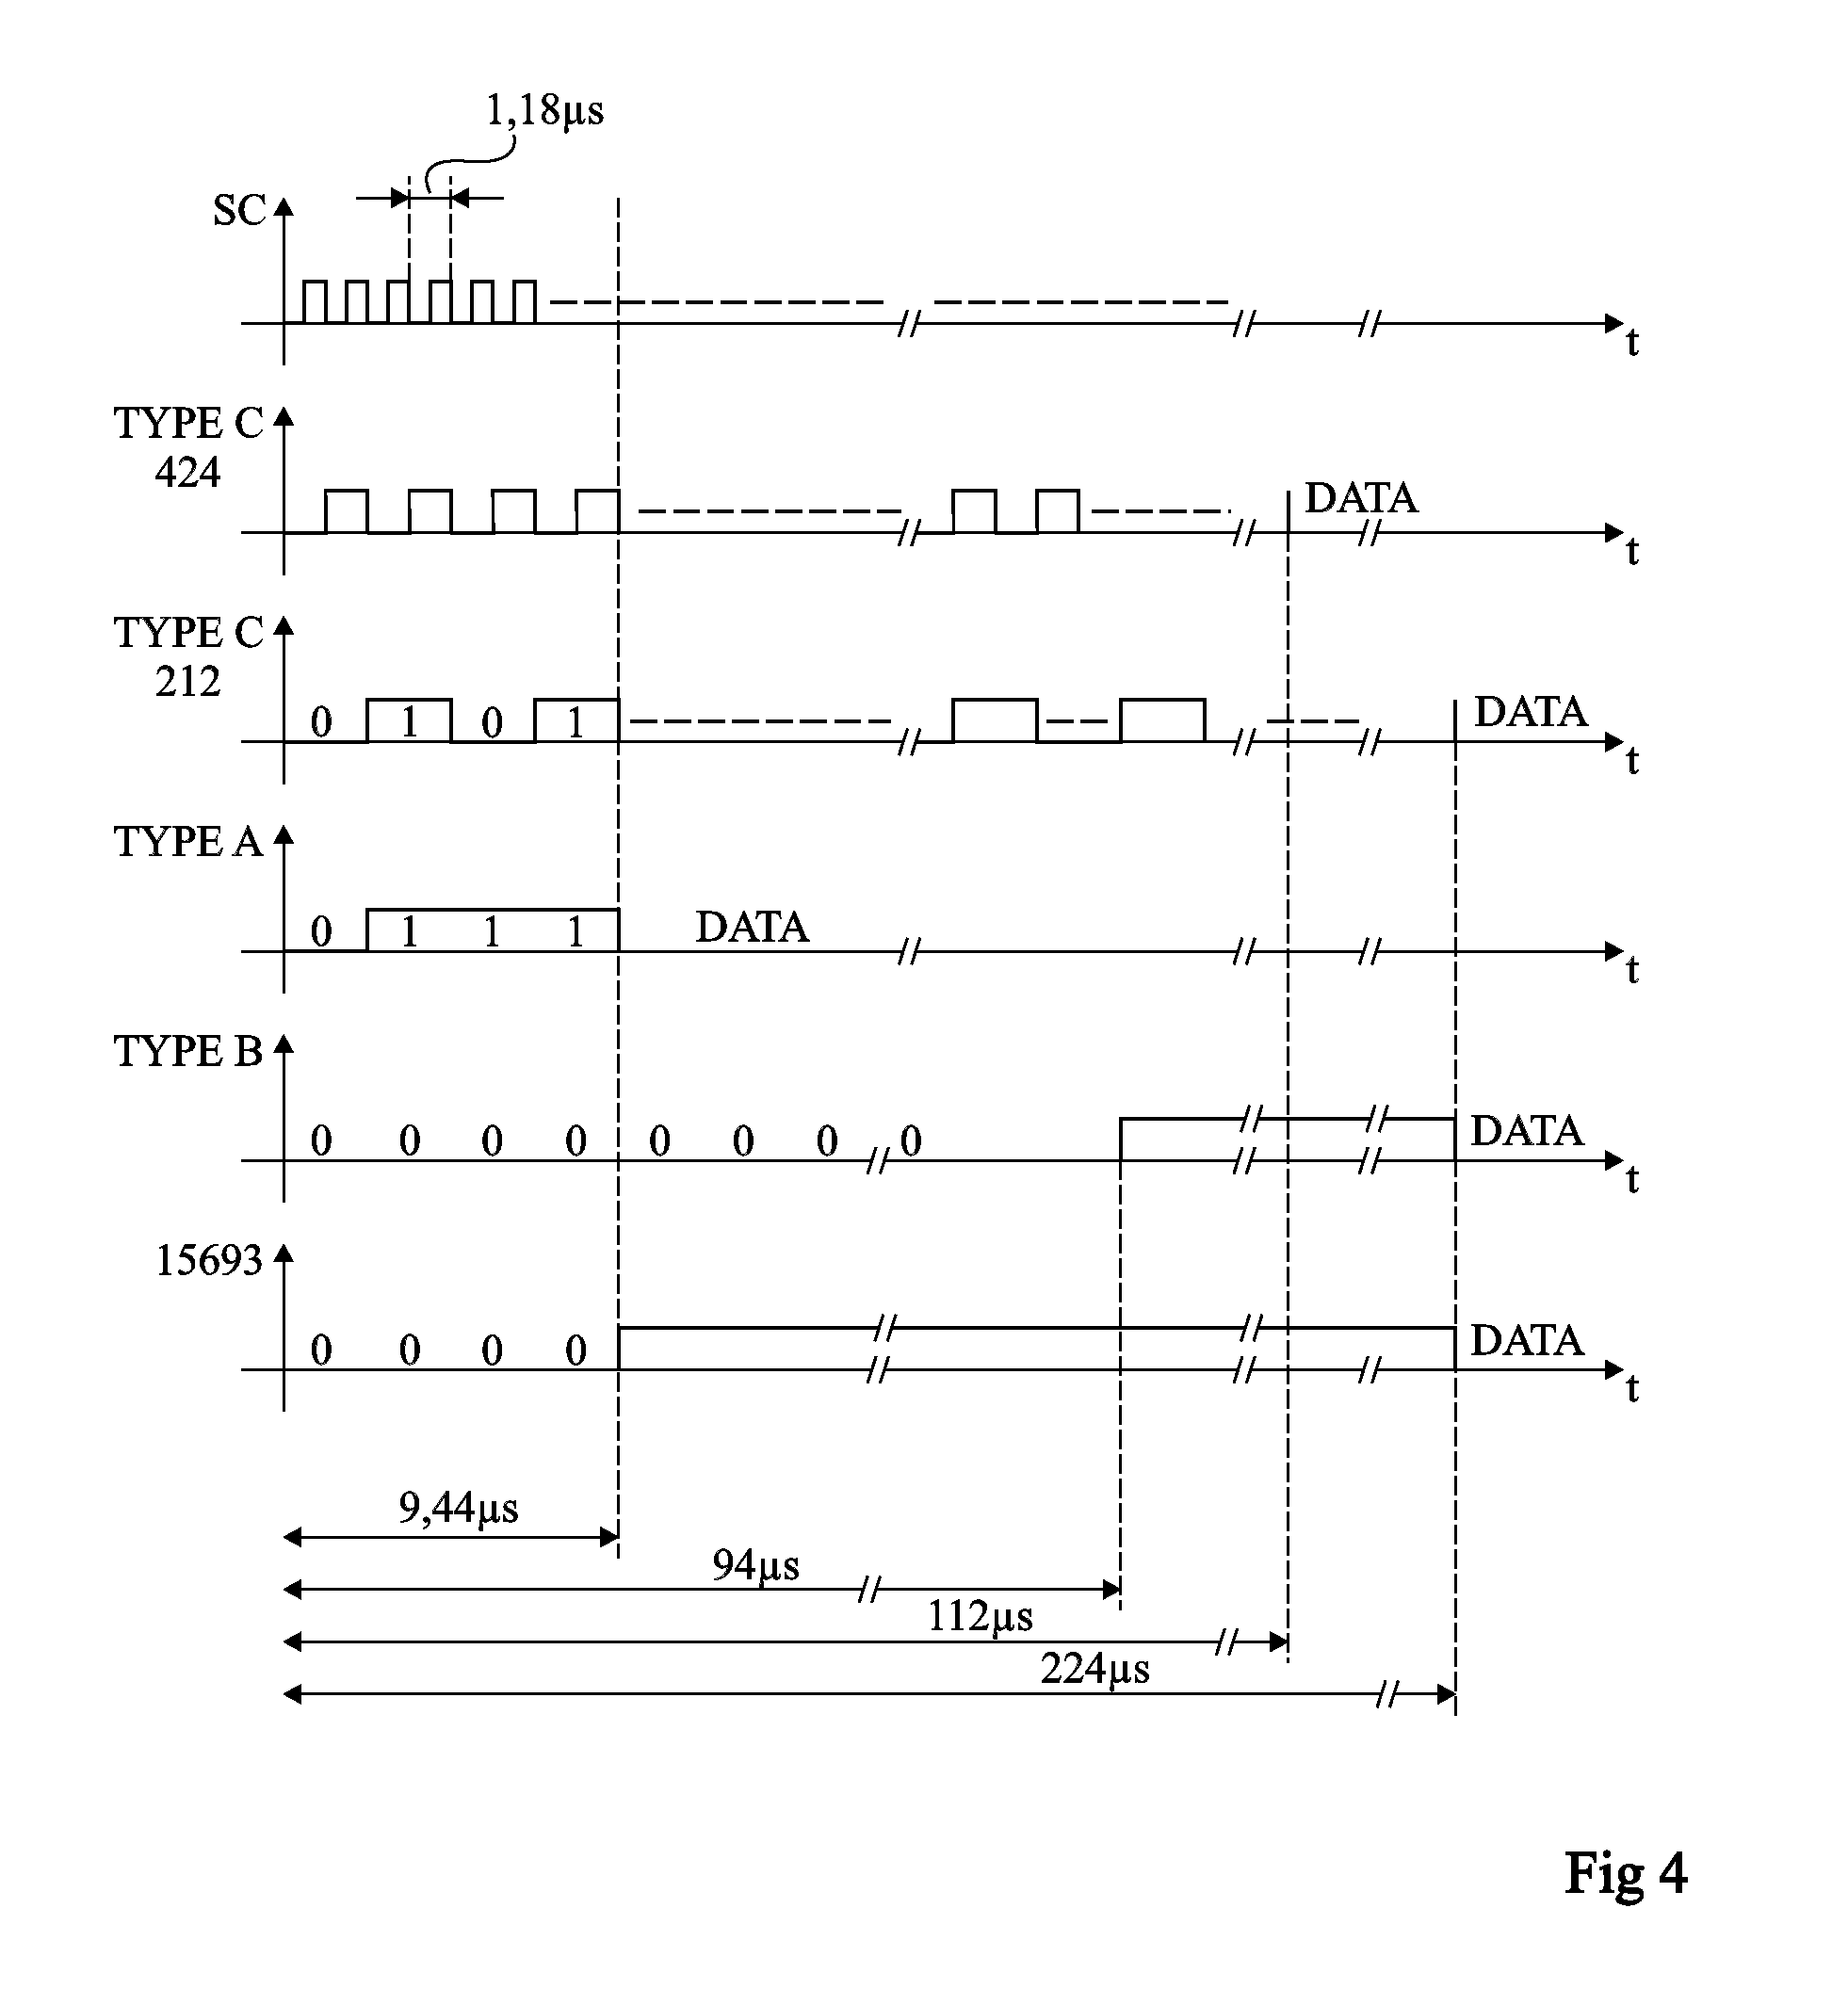 Configuration of a near-field communication router according to the modulation type